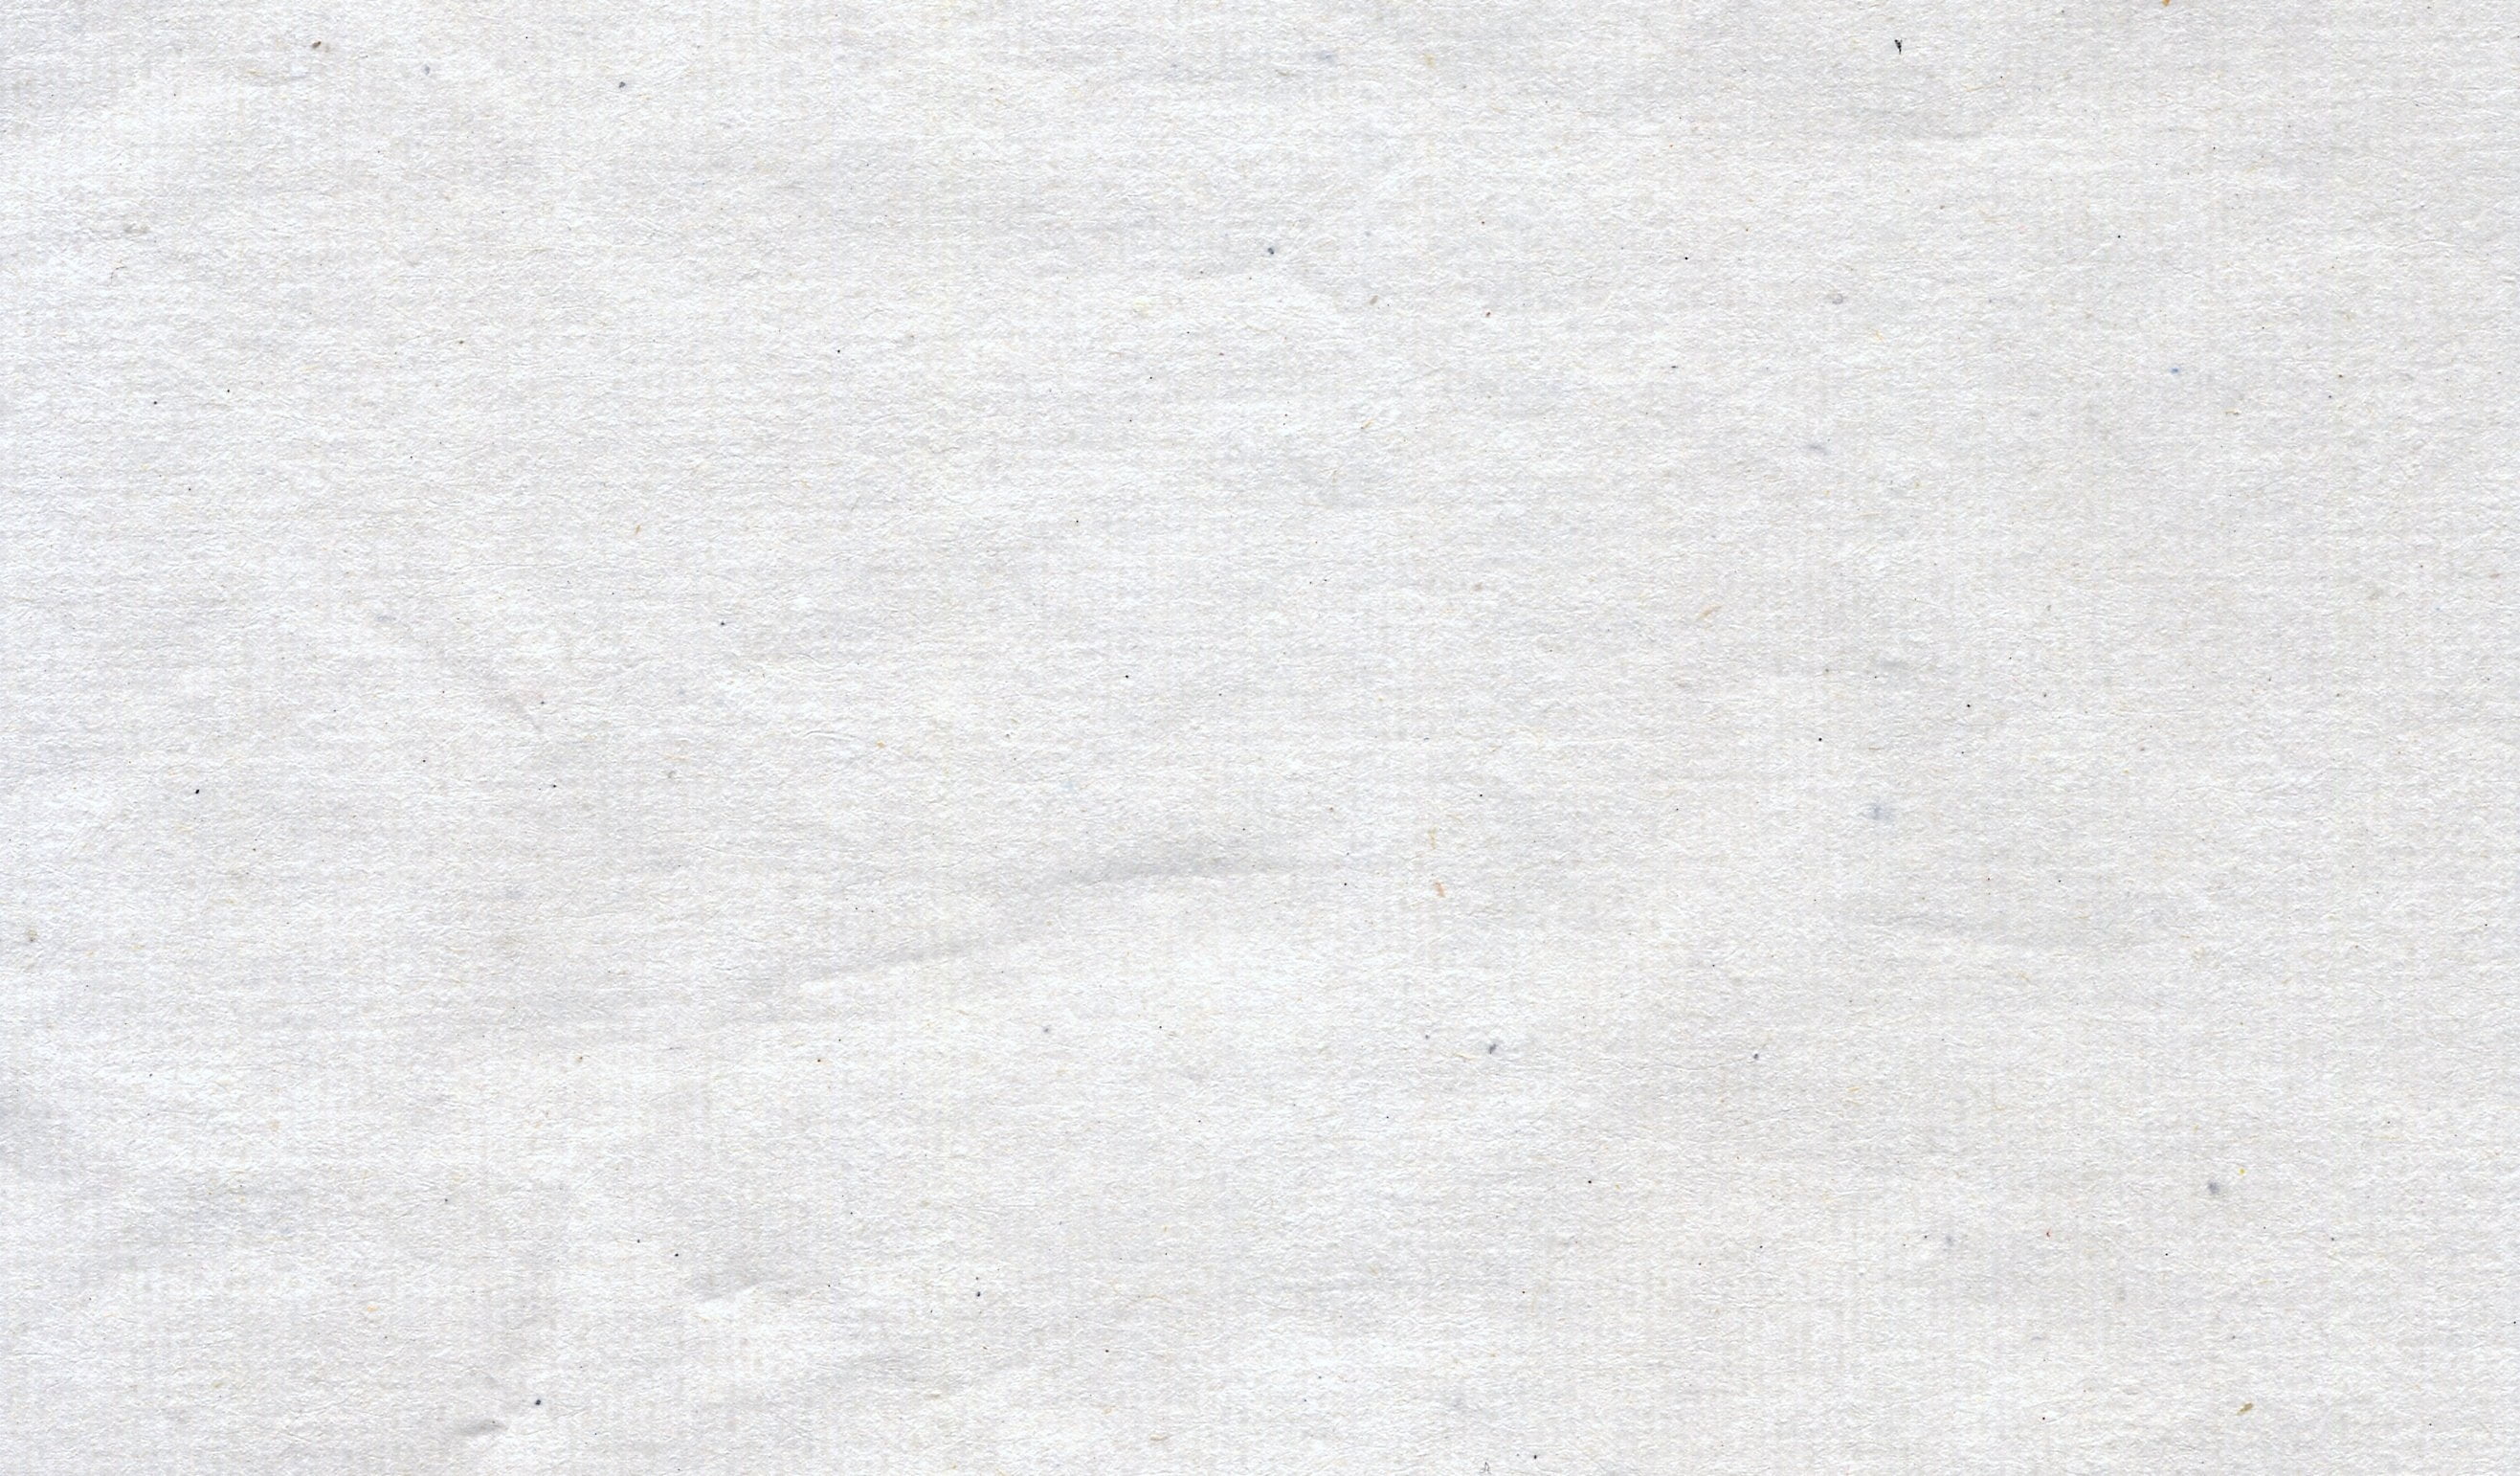 white, background, dents, bumps, texture, backgrounds, paper